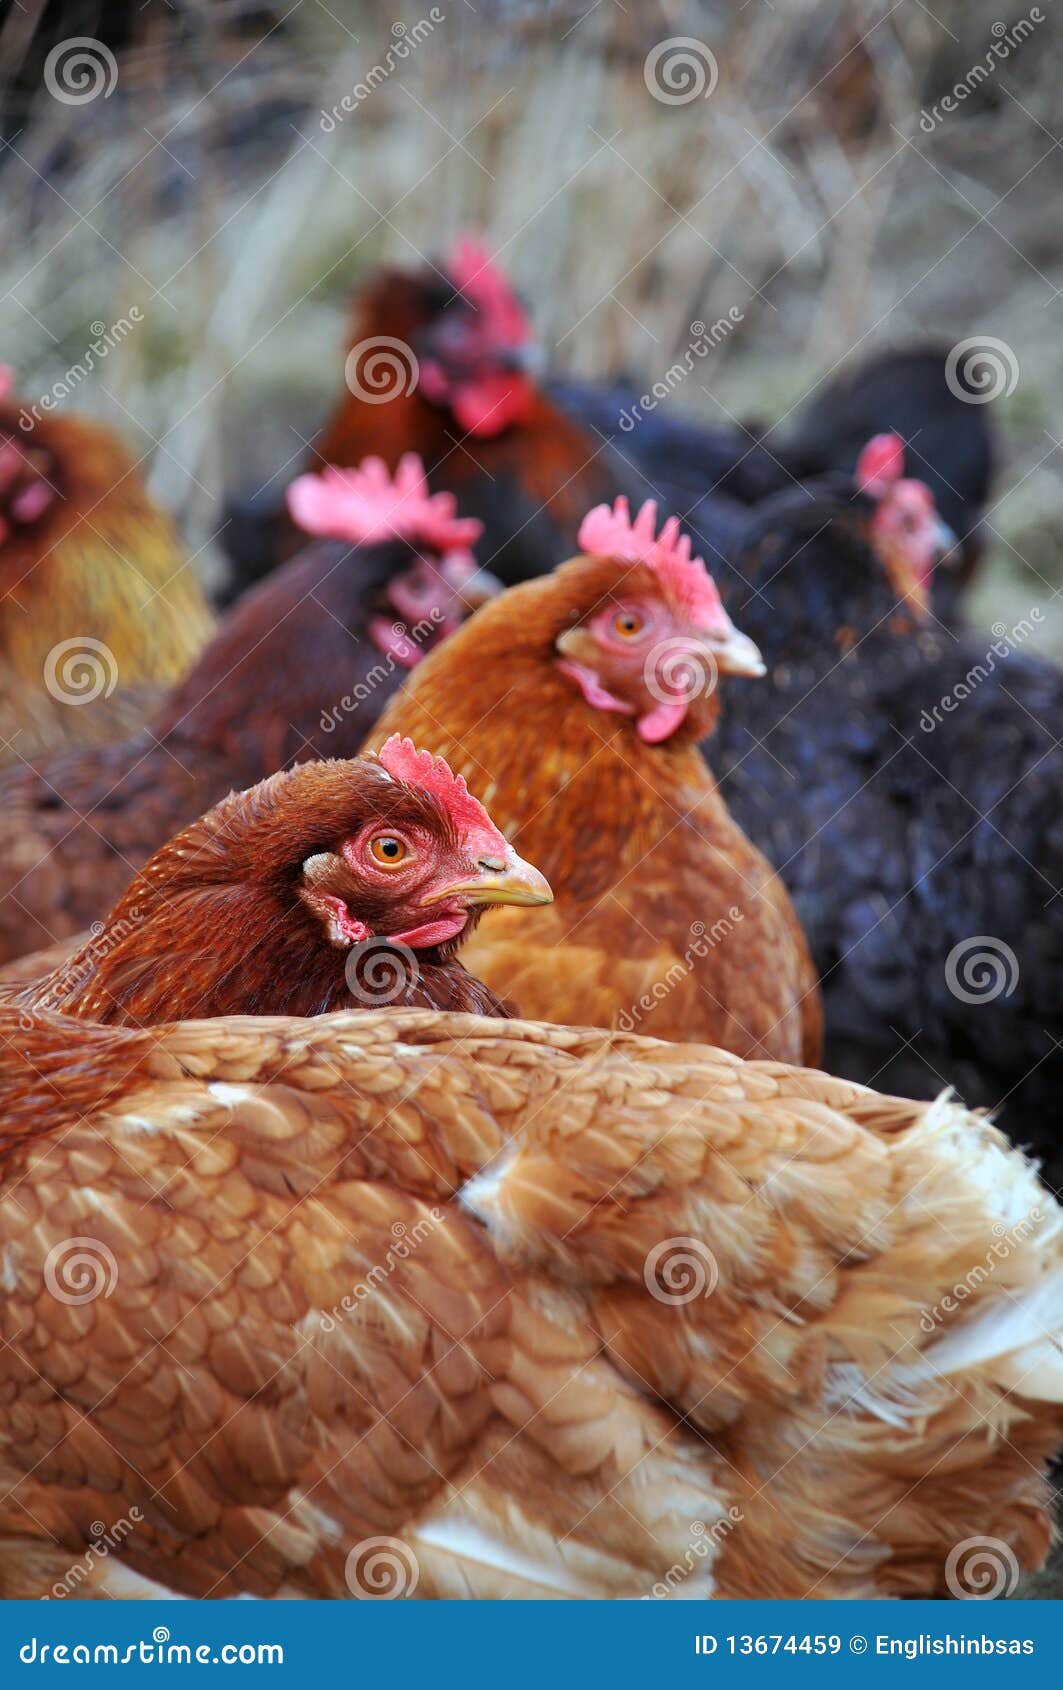 Group Of Hens 19